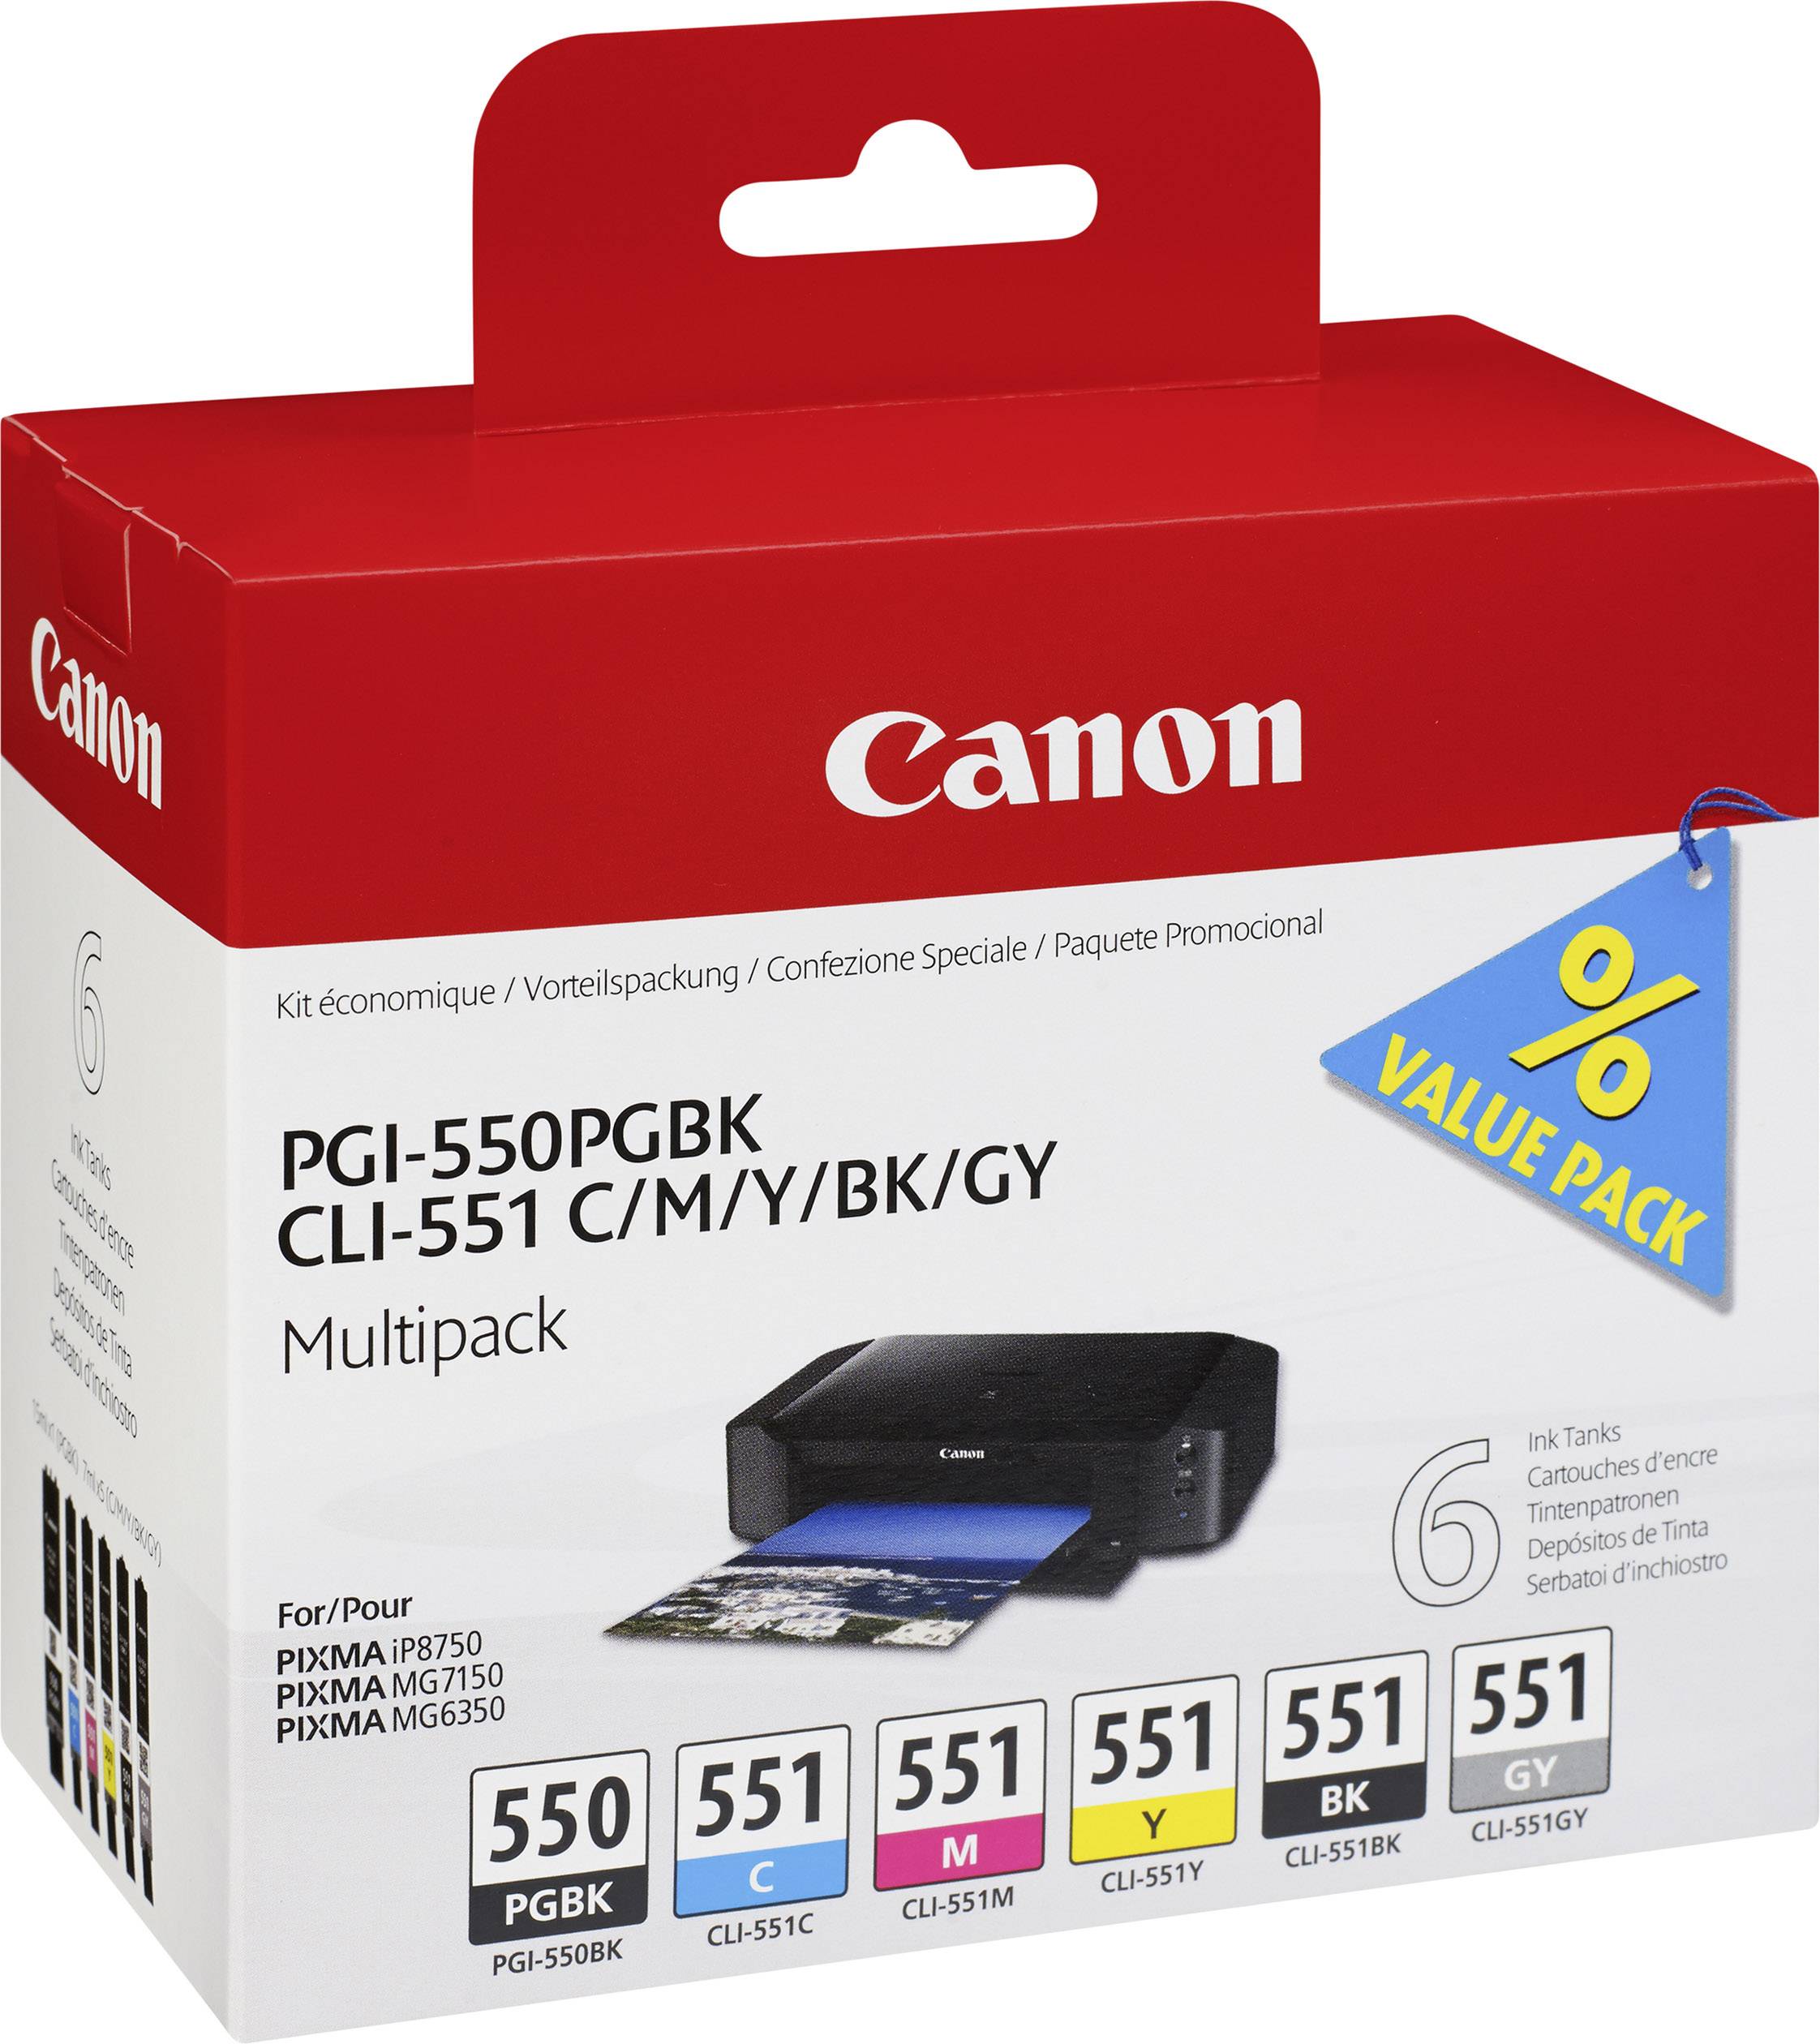 Multipack XL Ink Cartridge for Canon Pixma IP7250 MG6650 MG7550 MX925 MX725 